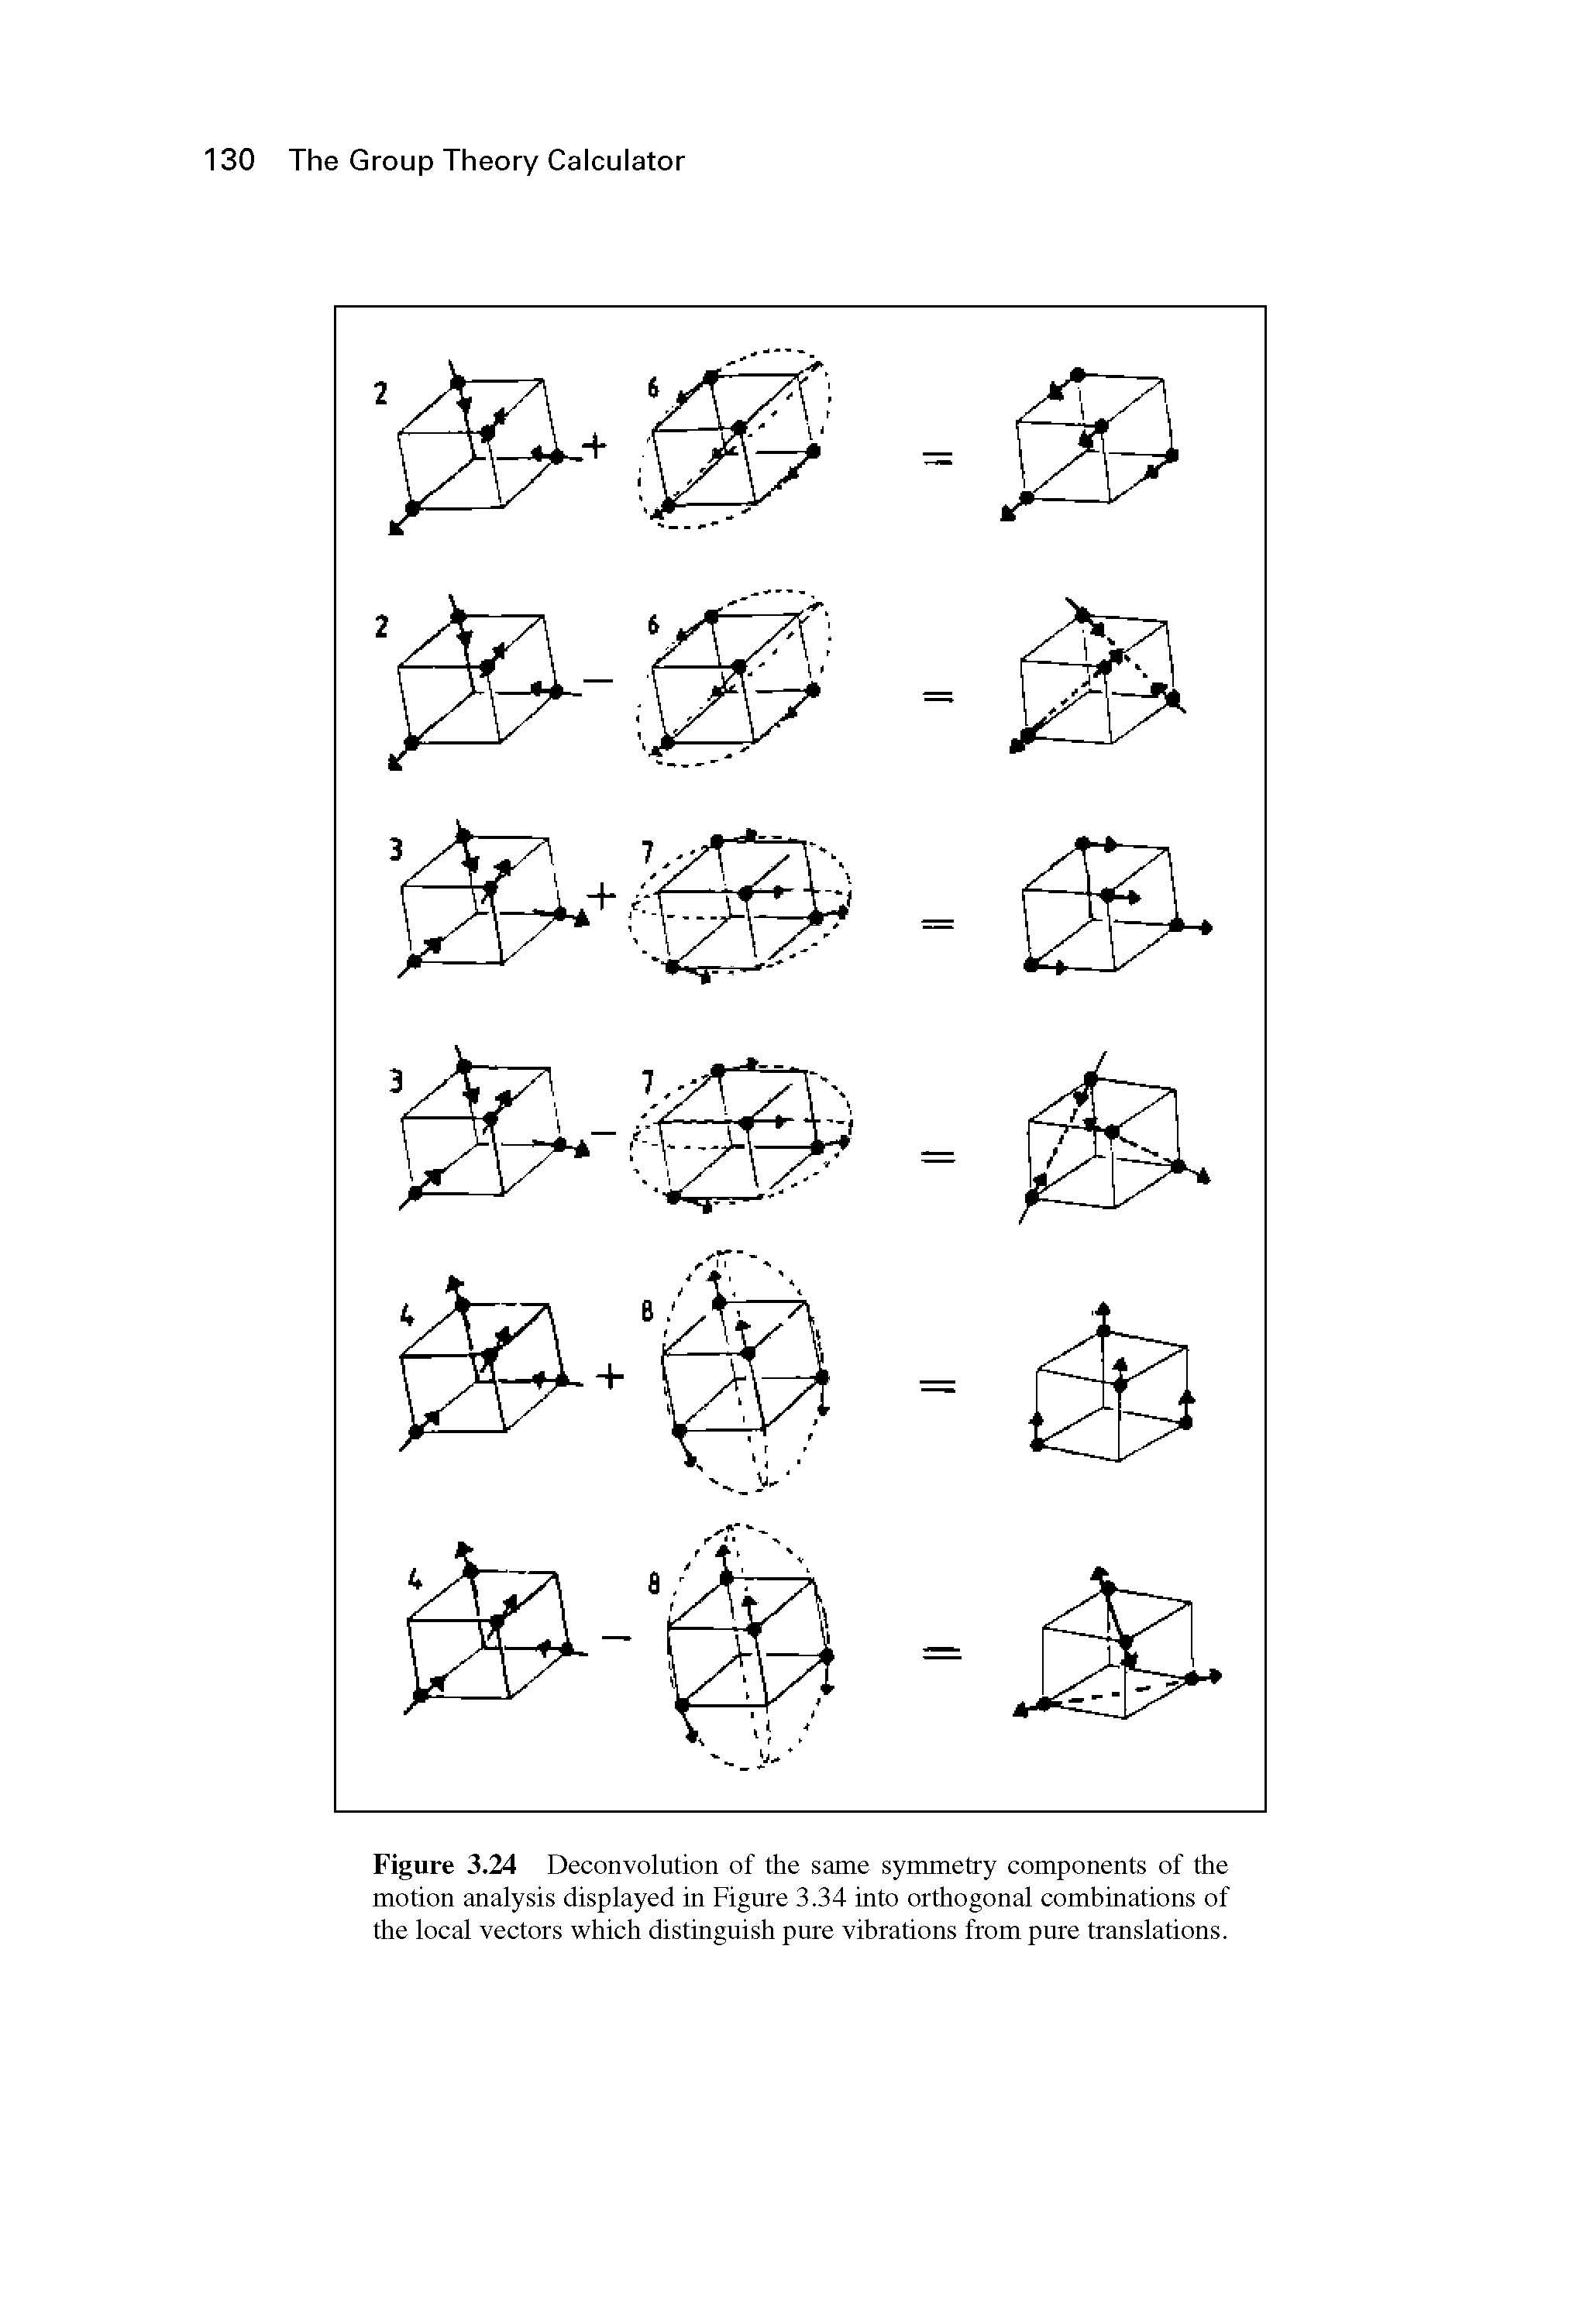 Figure 3.24 Deconvolution of the same symmetry components of the motion analysis displayed in Figure 3.34 into orthogonal combinations of the local vectors which distinguish pure vibrations from pure translations.